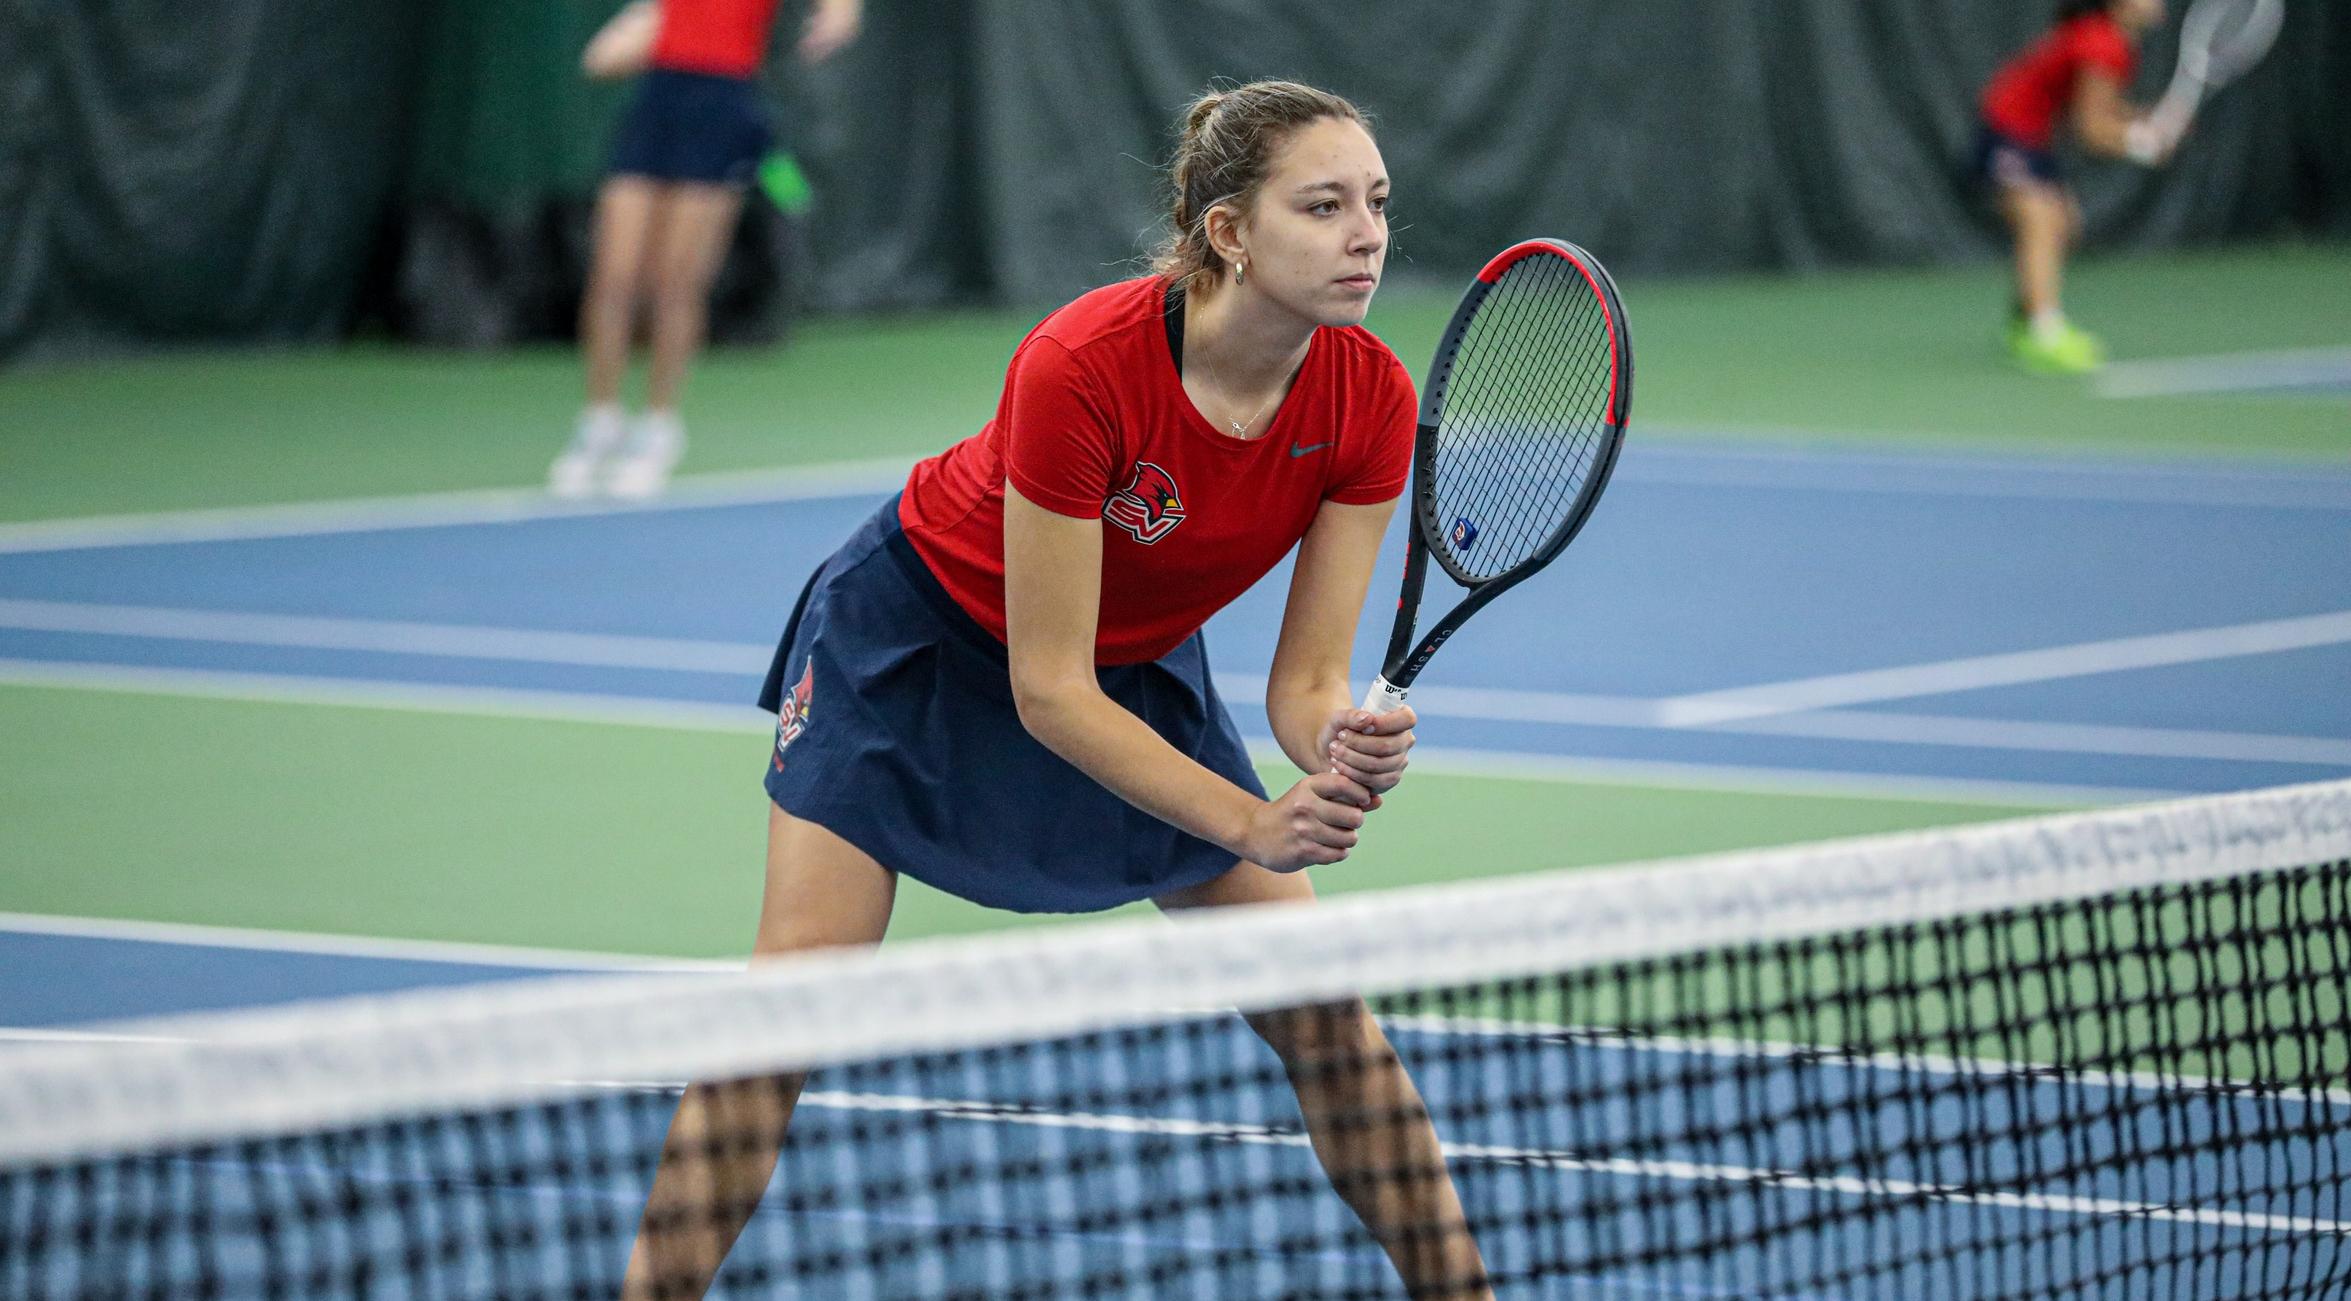 Tennis Comes Up Short at Ferris State